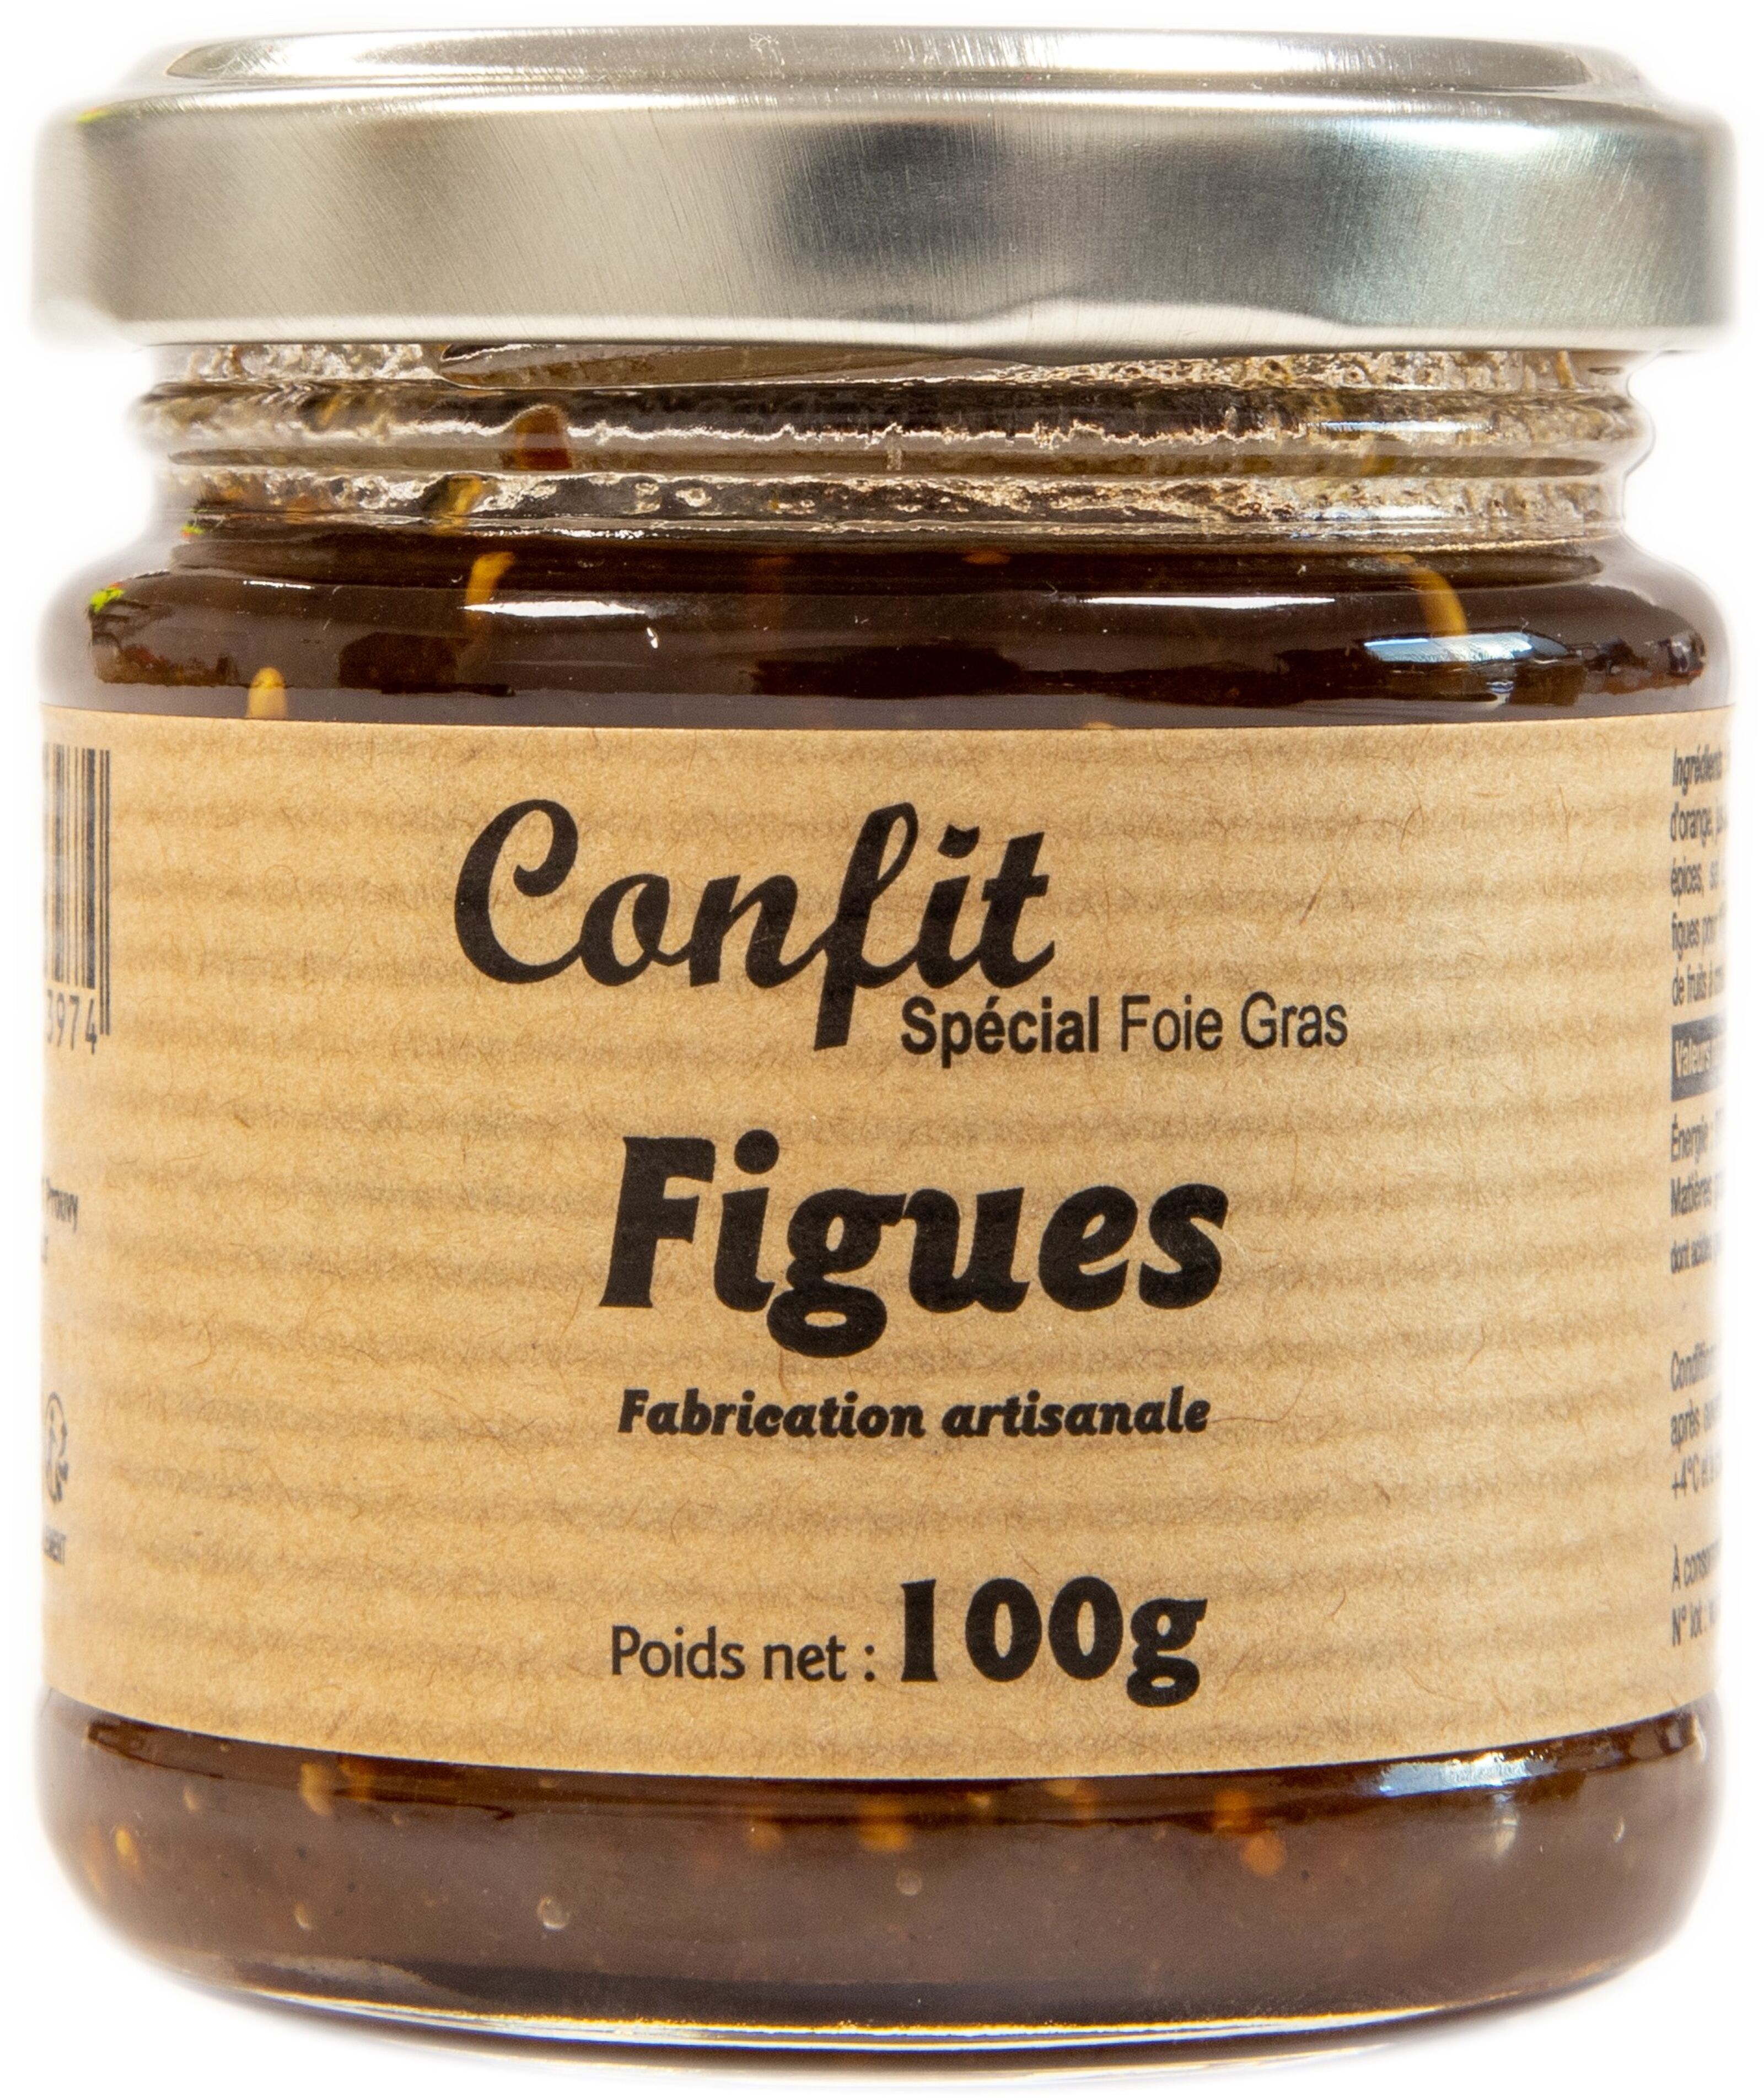 Confit Figues - Deluxe - 150 g